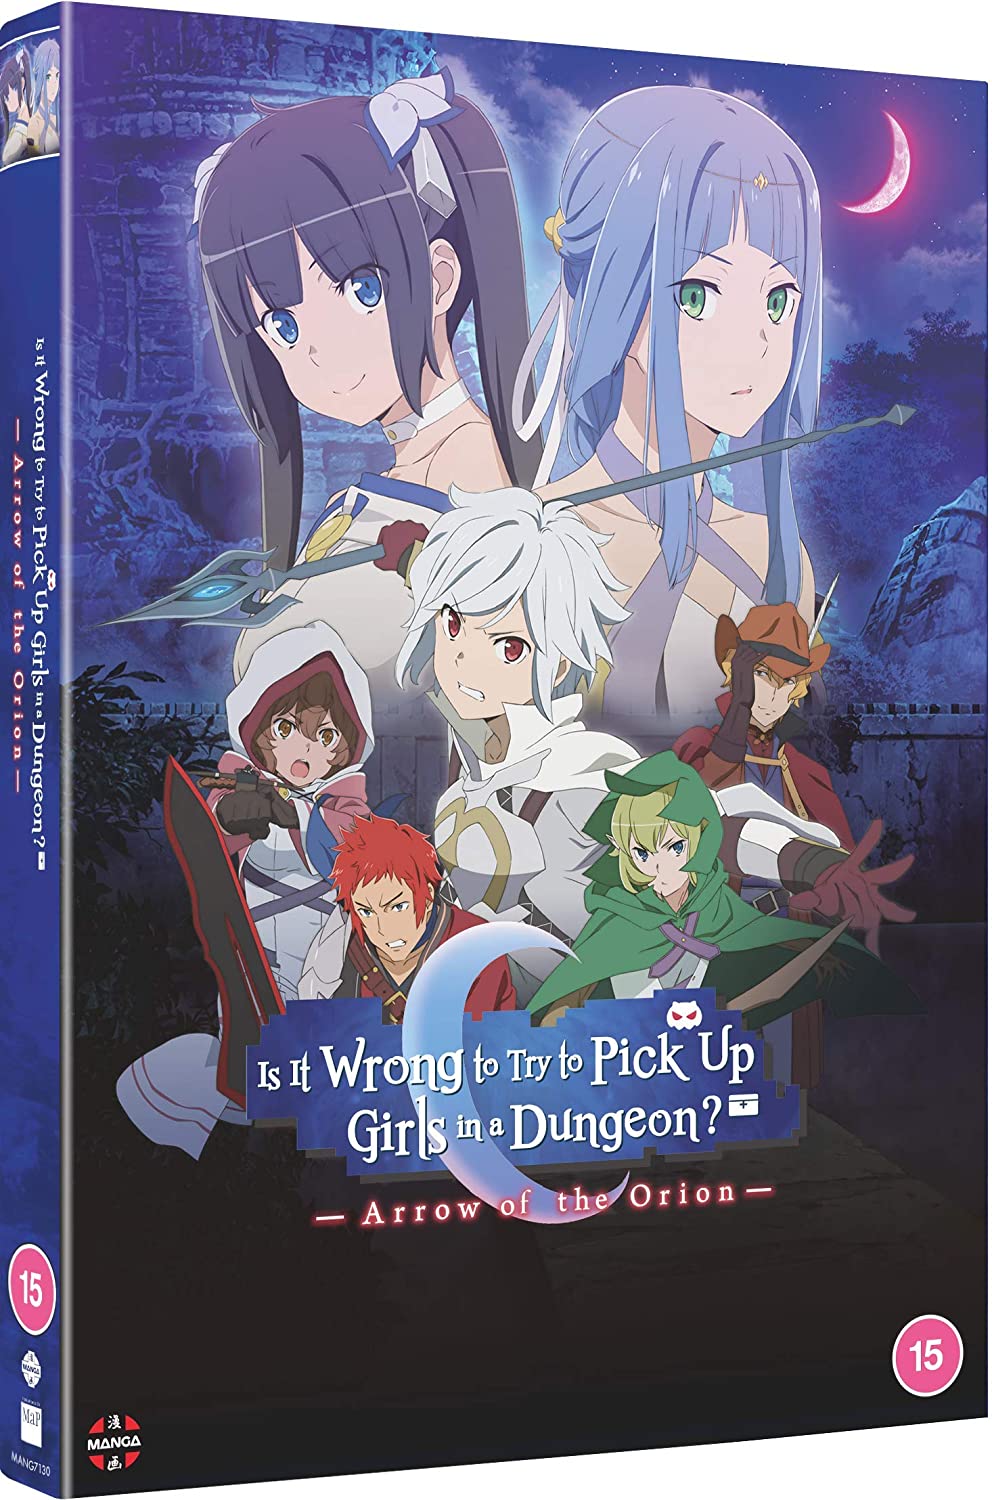 Is It Wrong to Try to Pick Up Girls in a Dungeon?: Arrow of the Orion [Blu-ray]